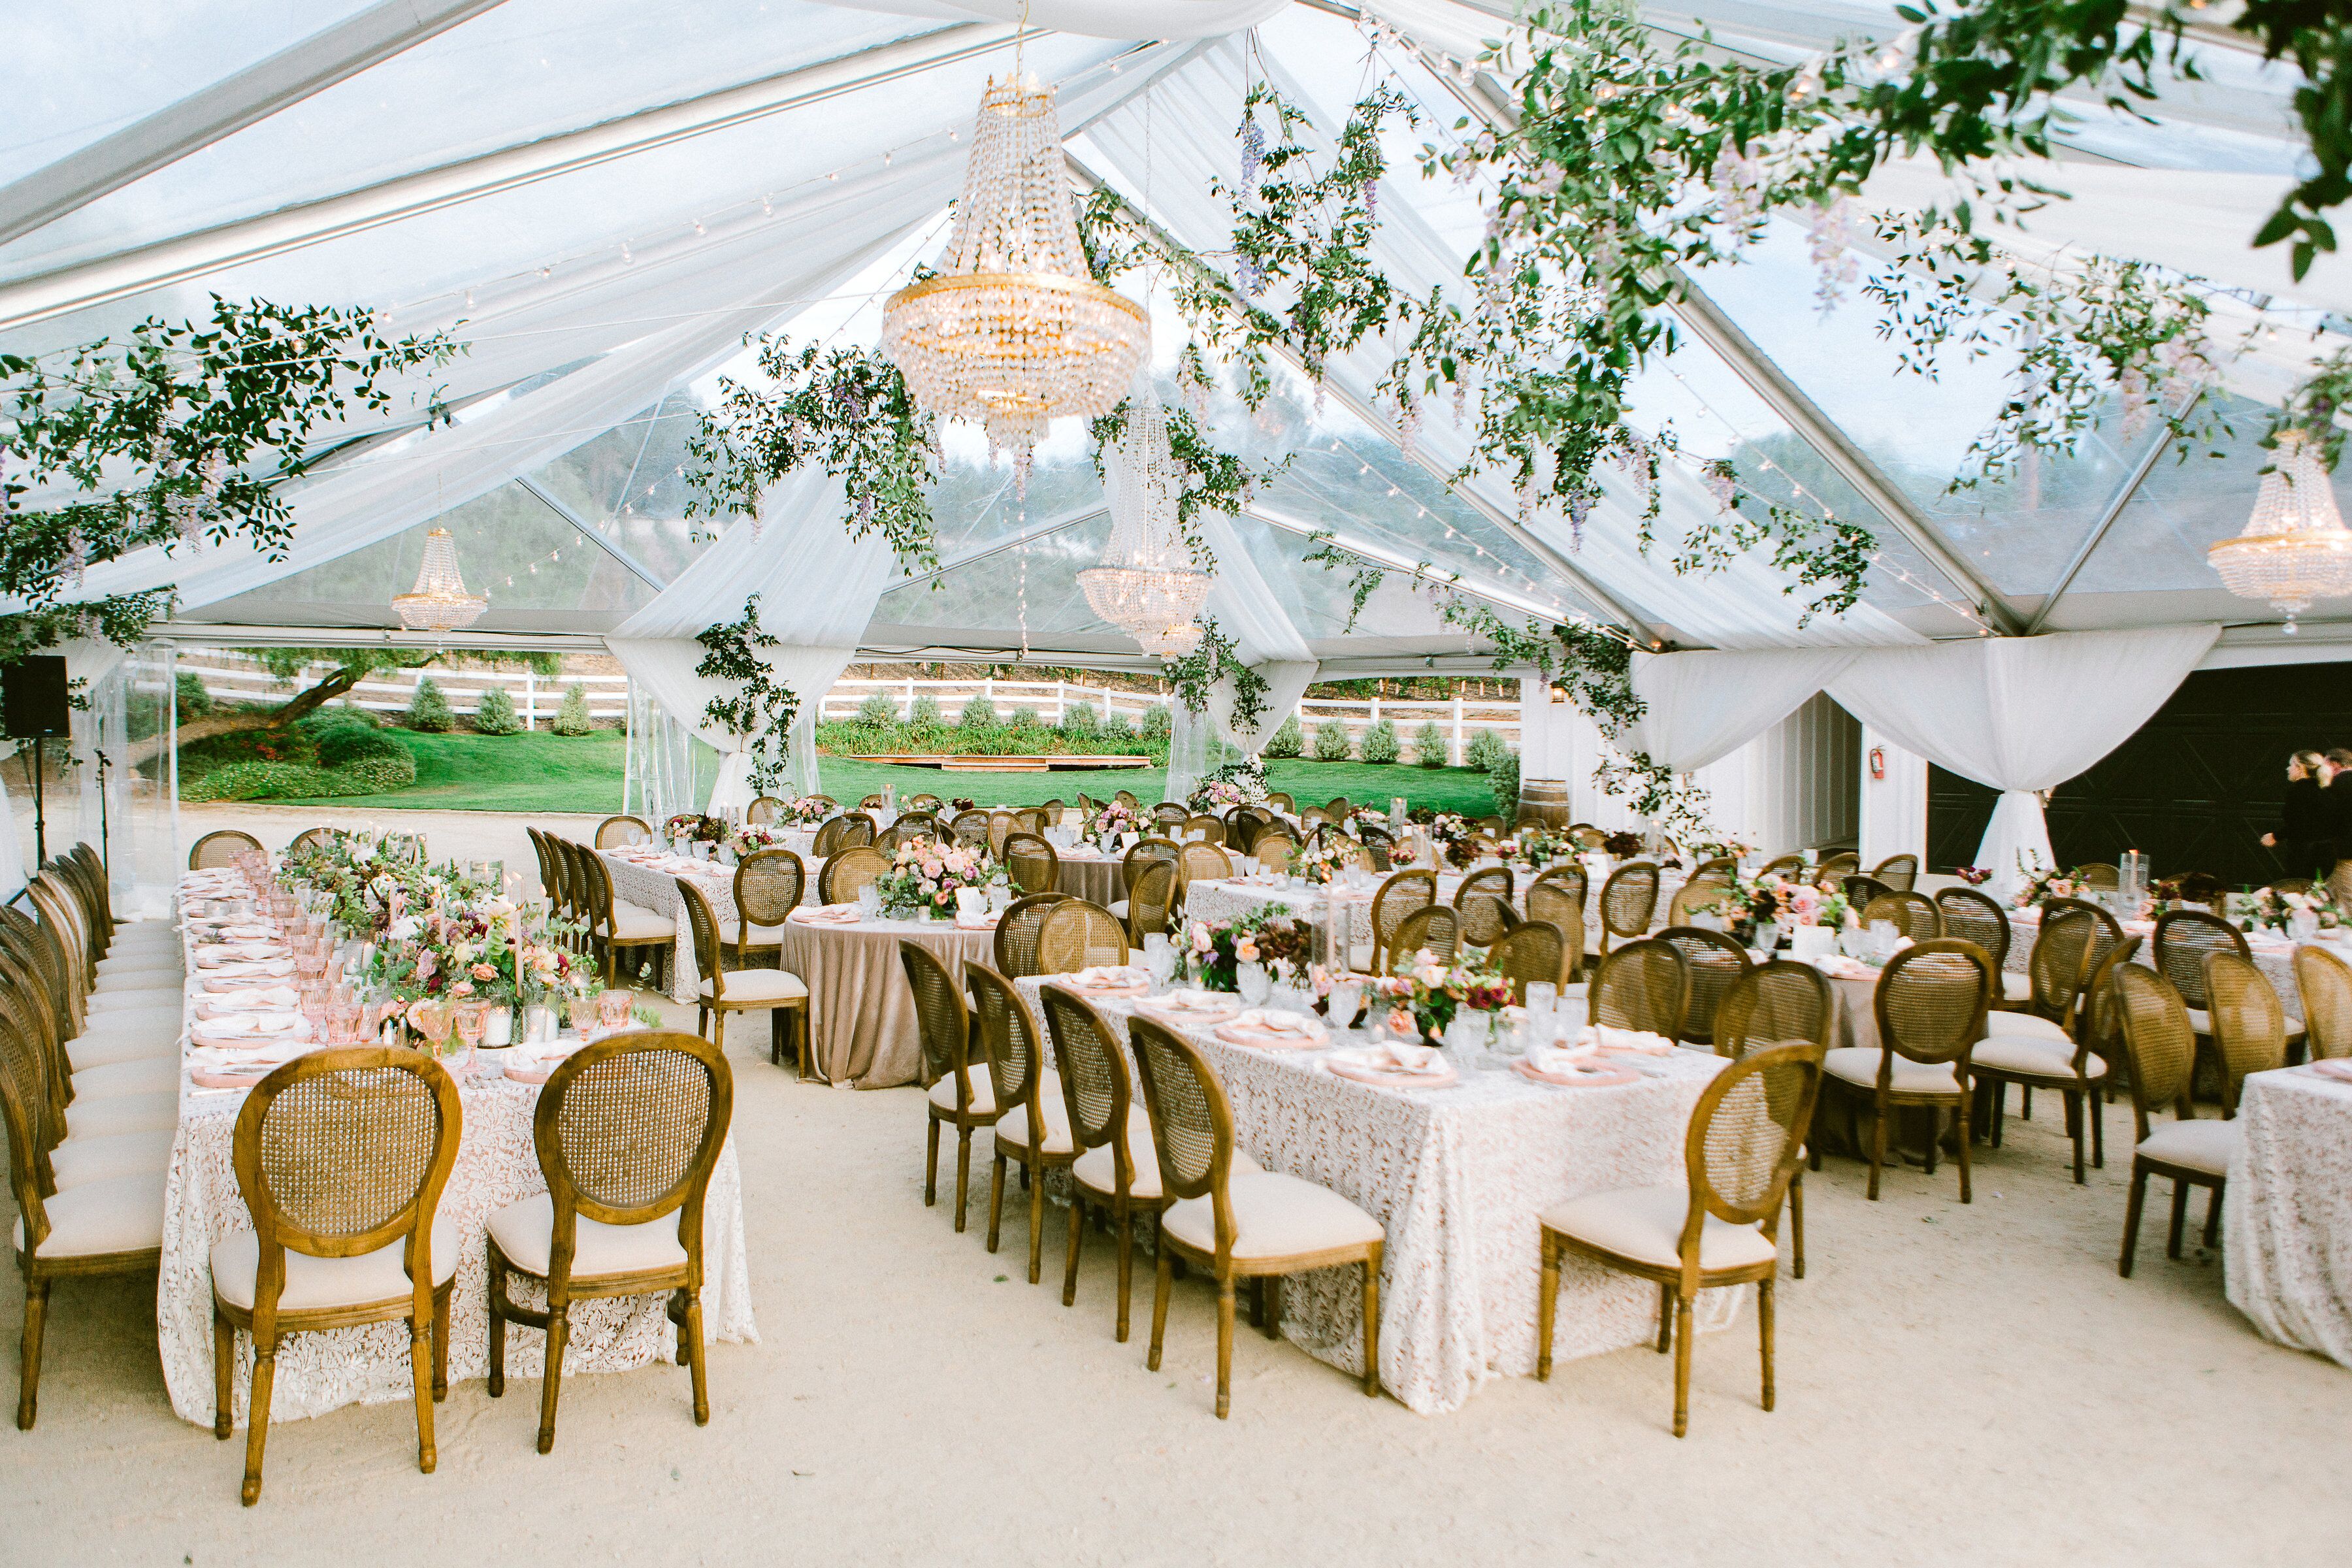 All About Events | Rentals - Paso Robles, CA